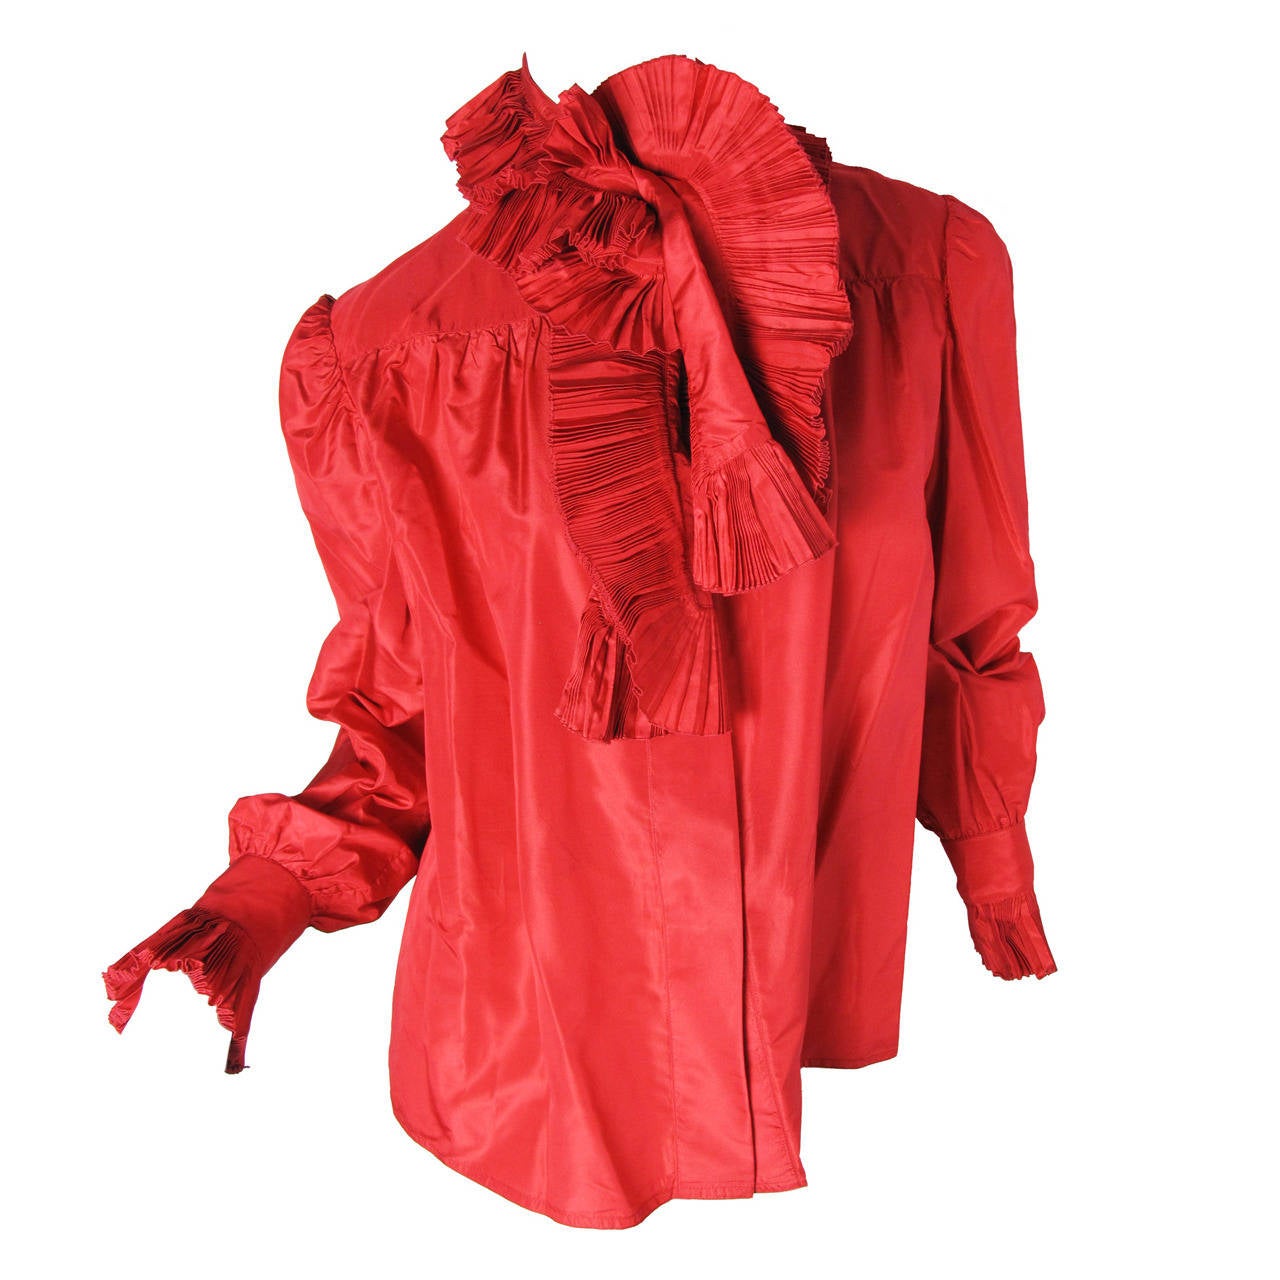 1980s Chloe red silk blouse with ruffled cuffs and collar